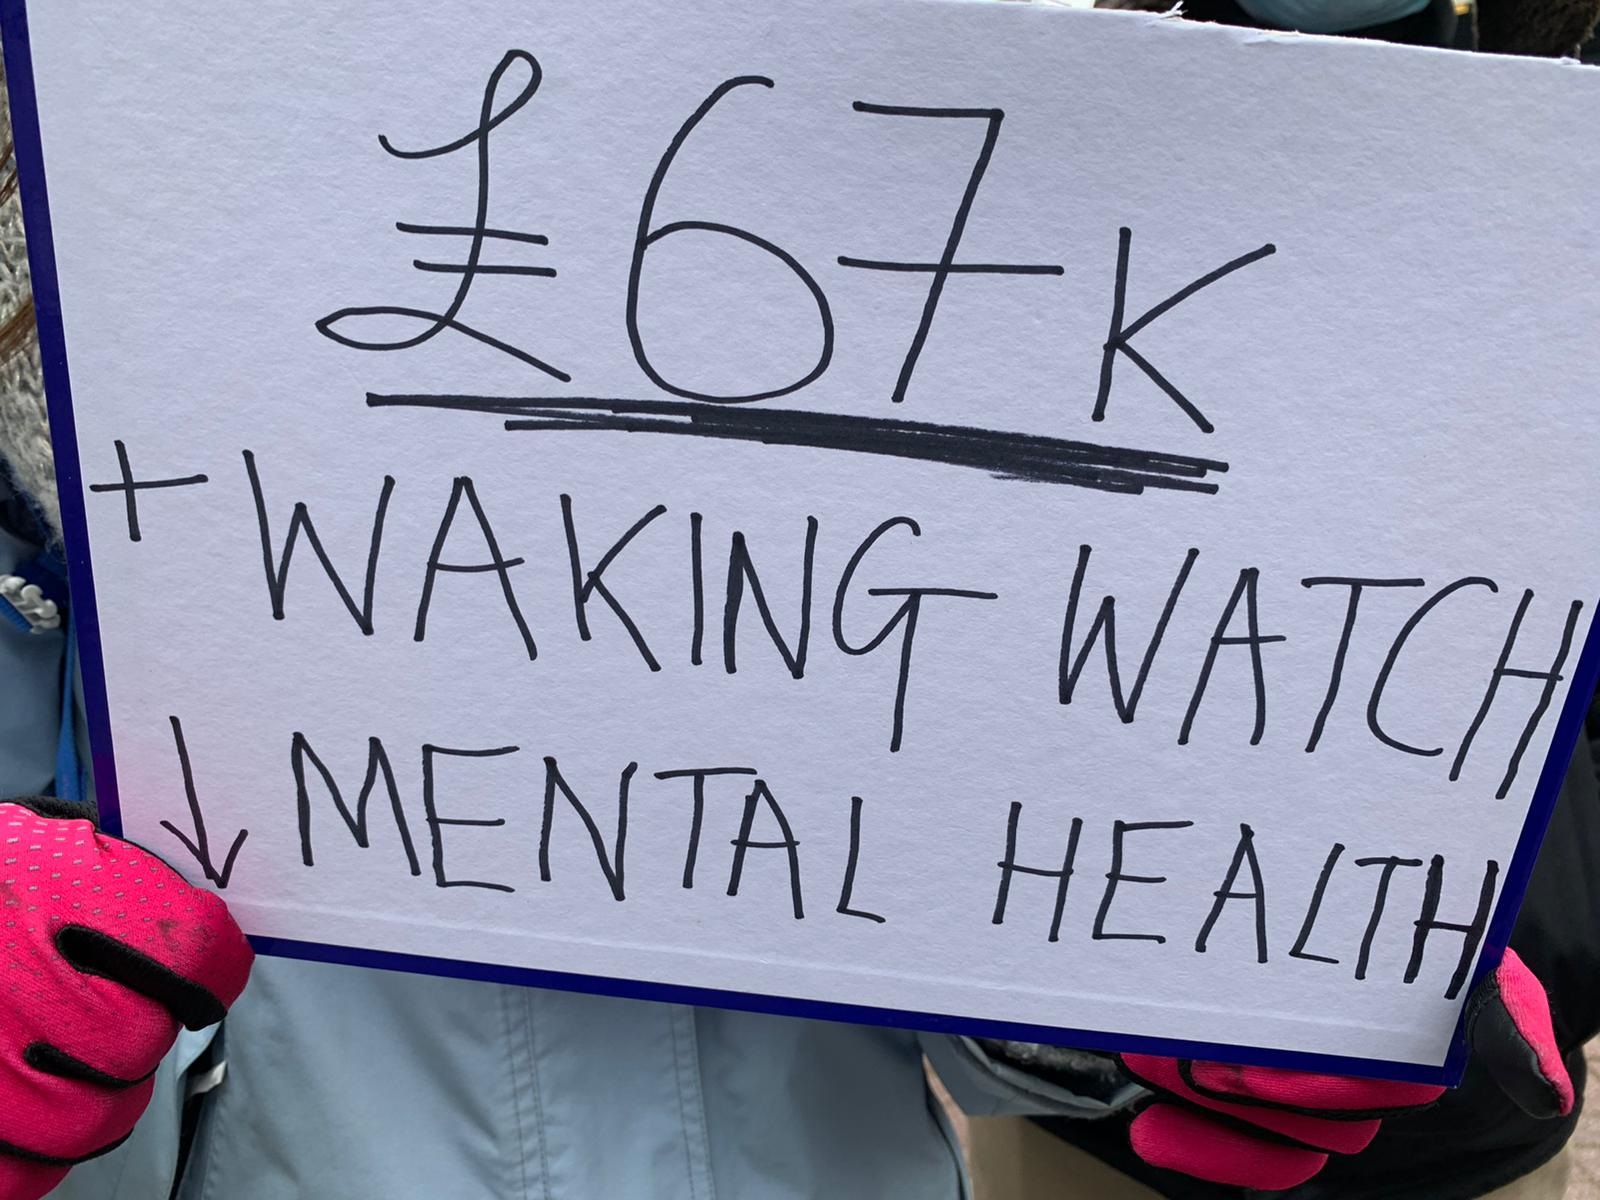 A sign held by a protester, protesting against the cost of waking watches - it says '£67k + Waking Watch - Mental Health'